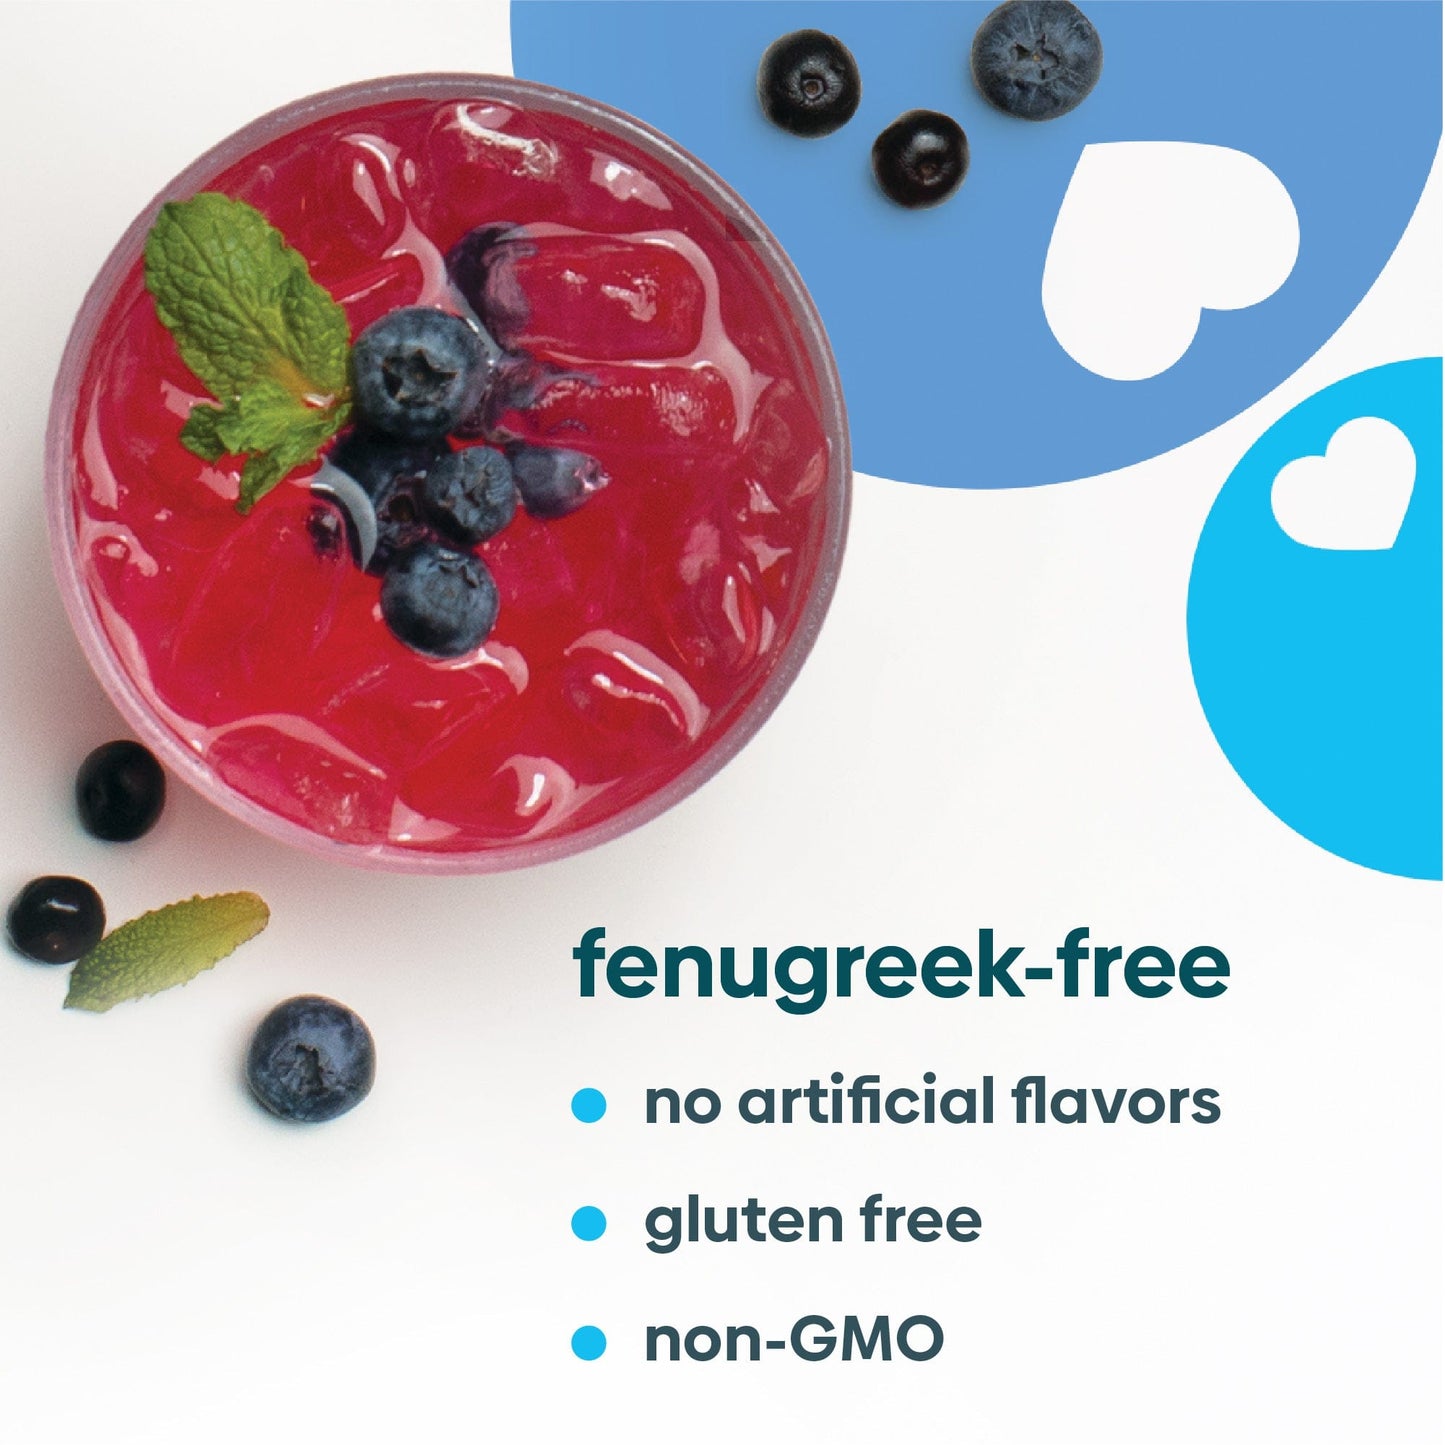 A glass of MilkFlow Blueberry Acai is shown with product claims